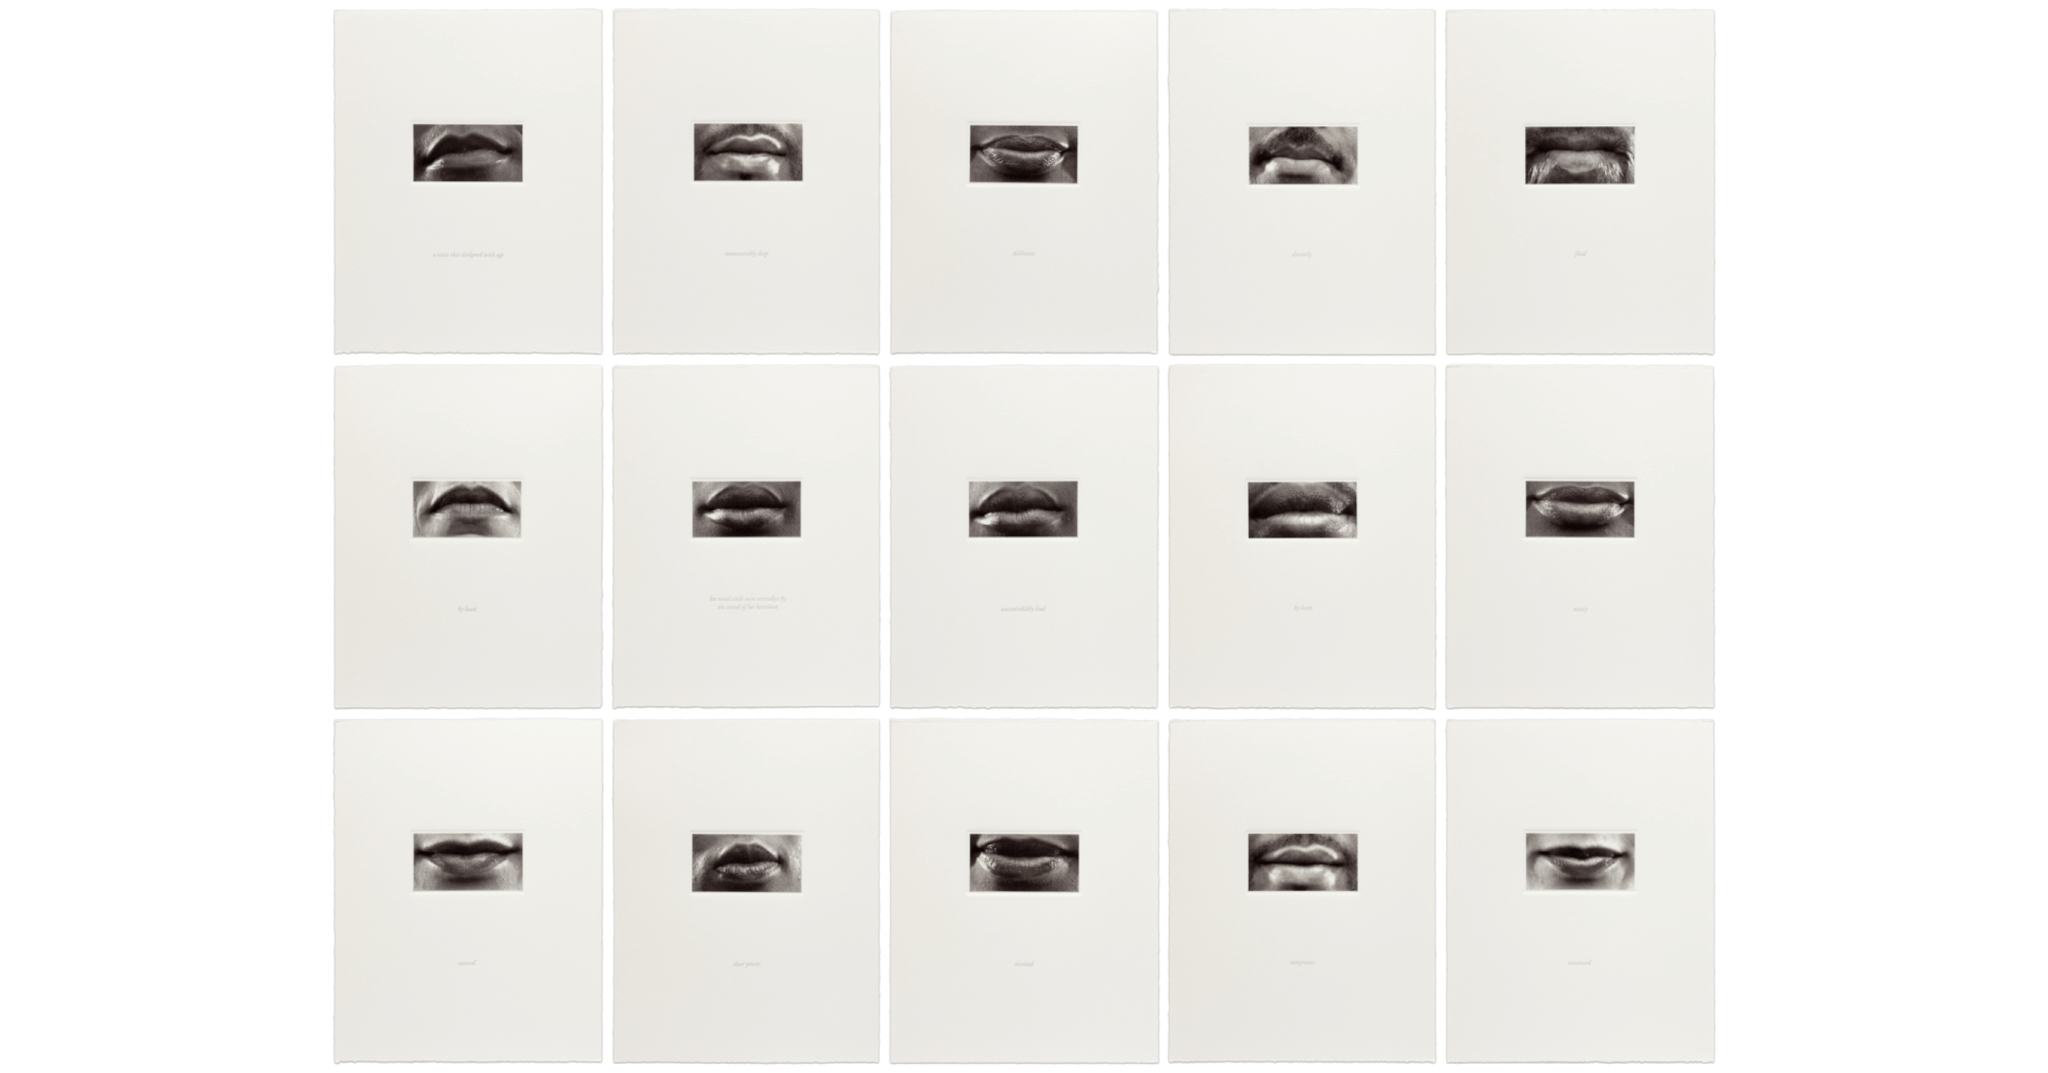 Image of "15 Mouths" by Lorna Simpson